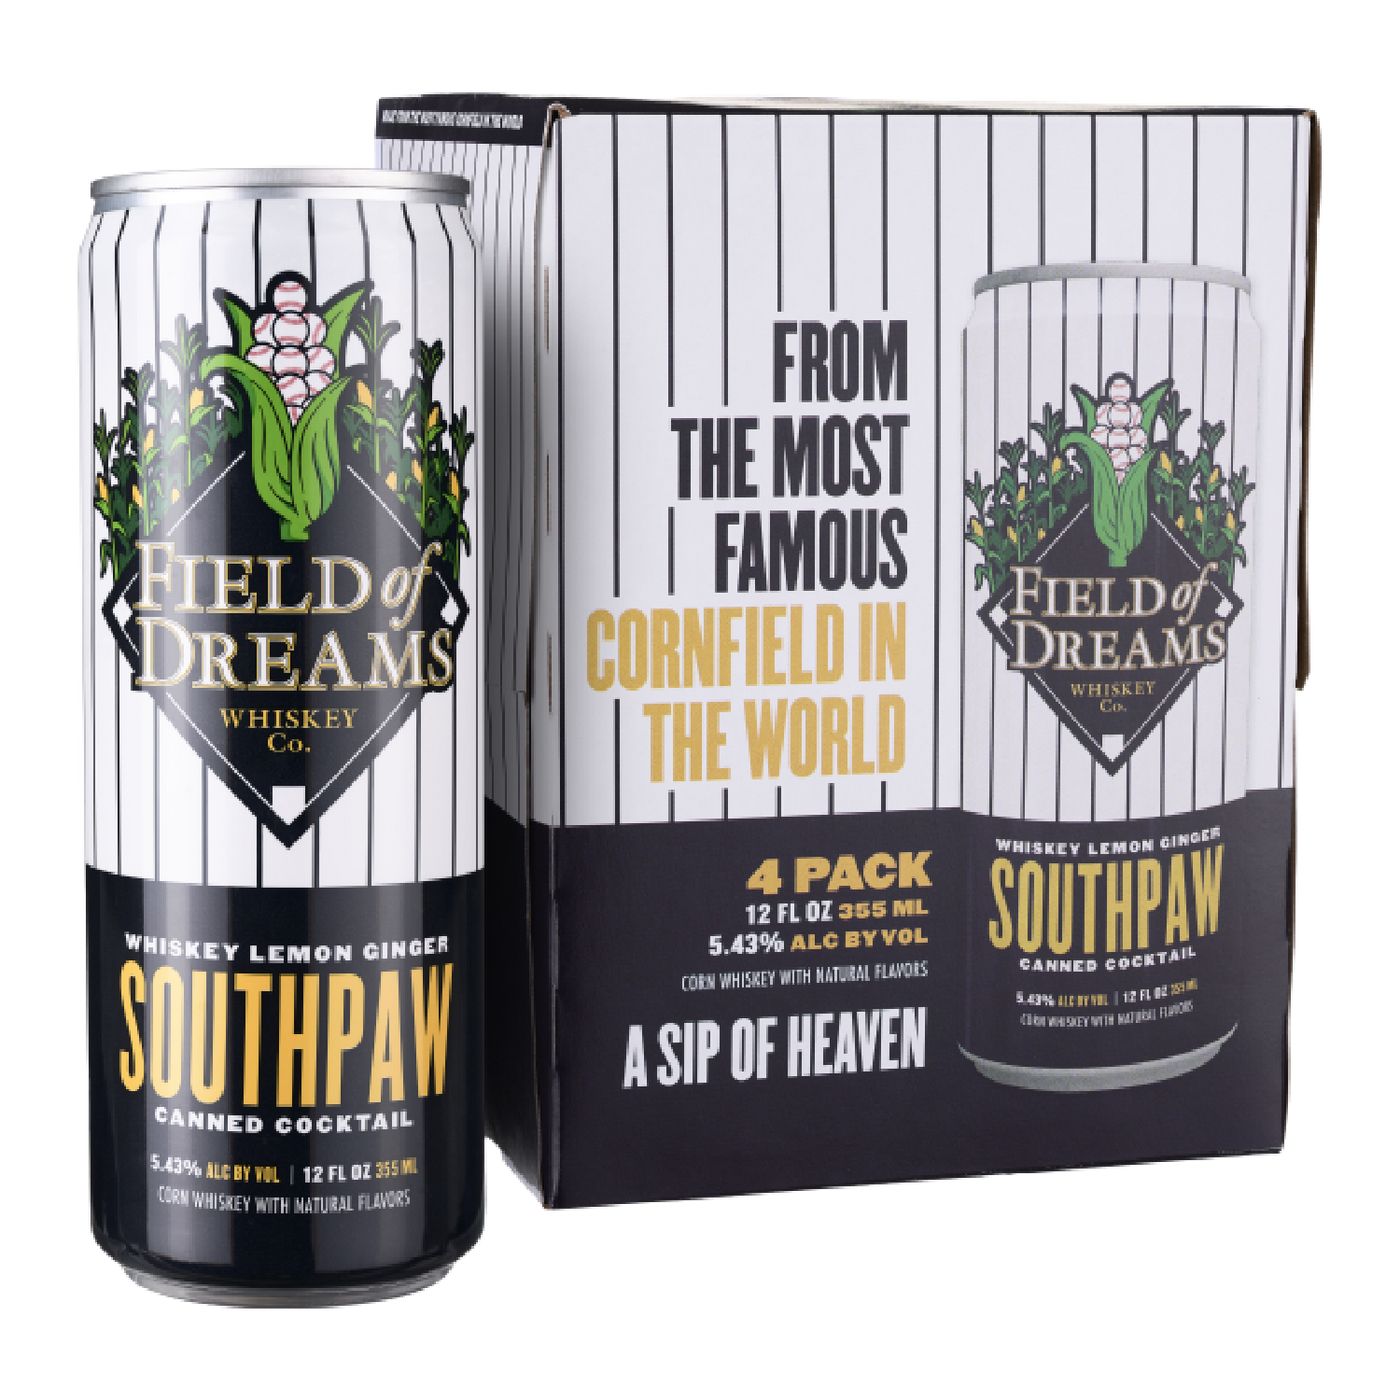 Field of Dreams Southpaw Whiskey Lemon Ginger Canned Cocktail